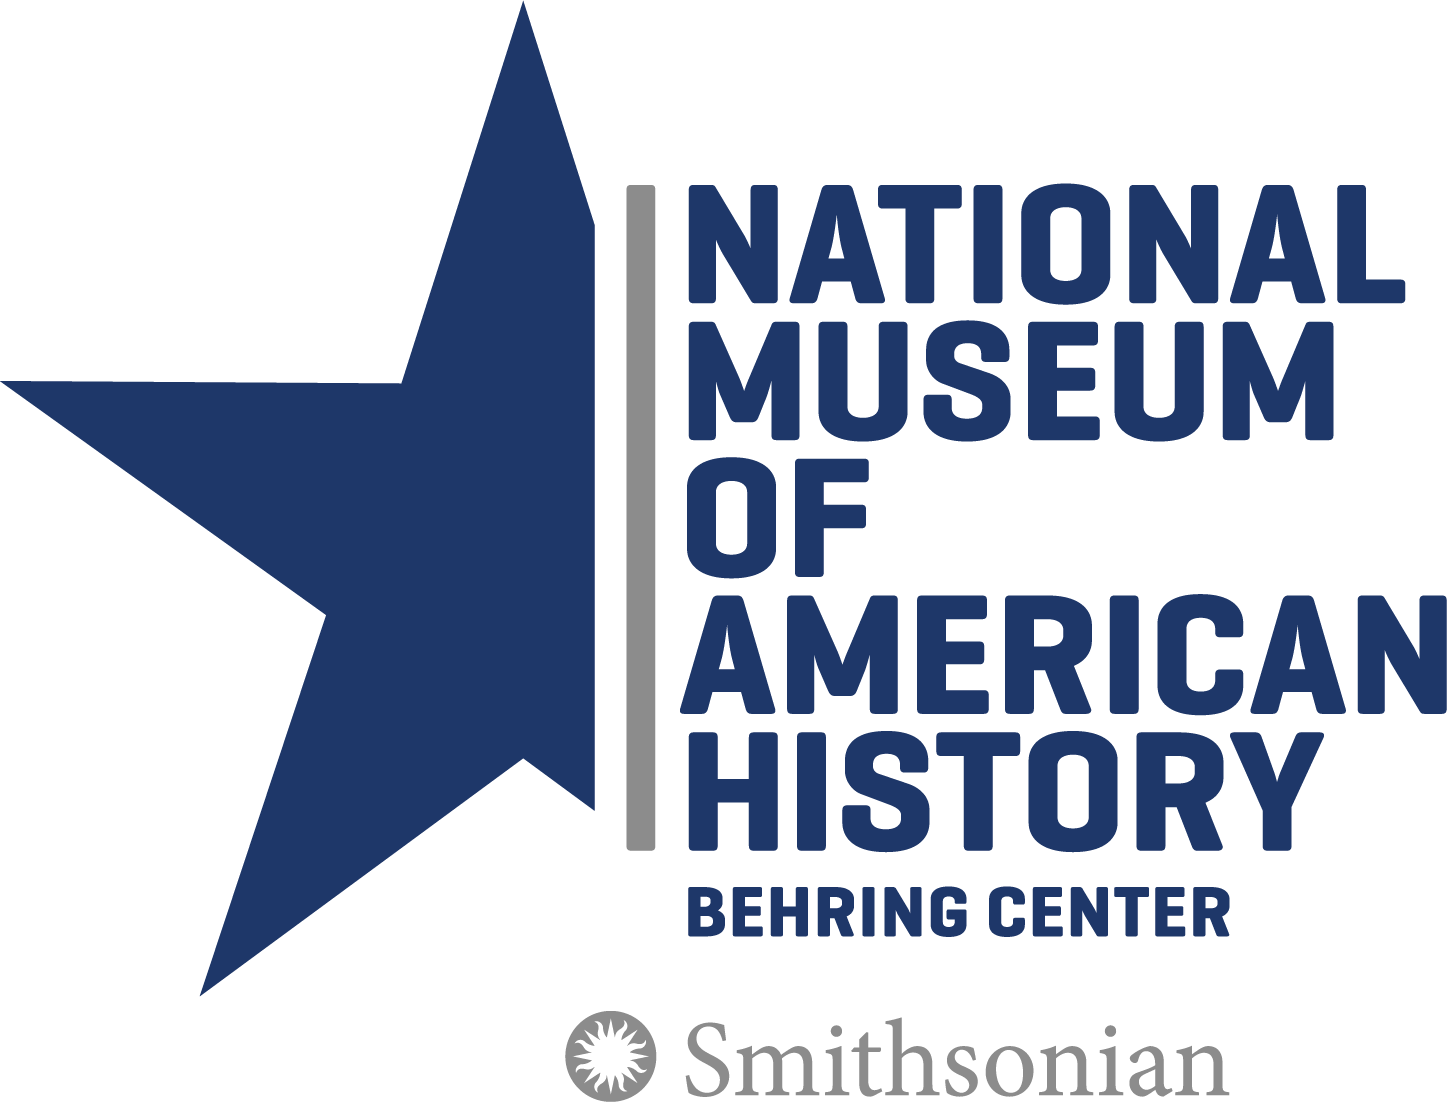 Smithsonian's National Museum of American History